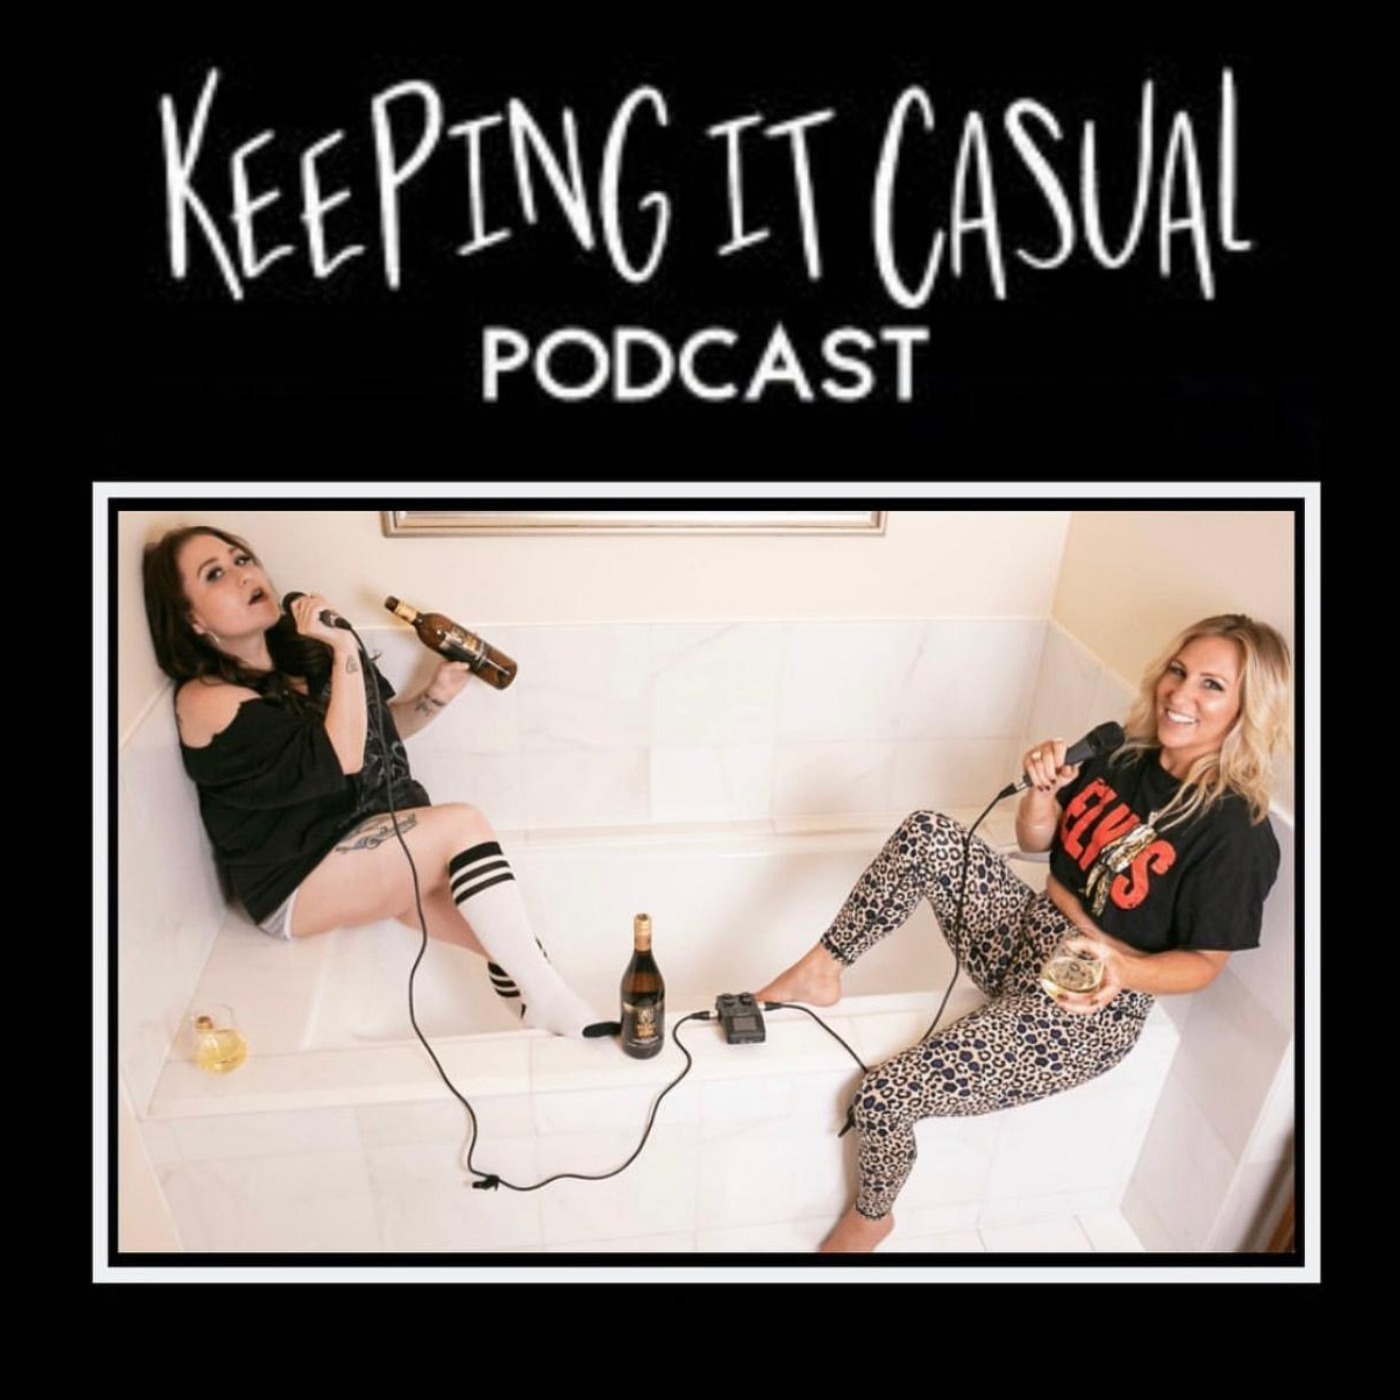 EPISODE 154 - FOUR YEARS OF KEEPING IT CASUAL